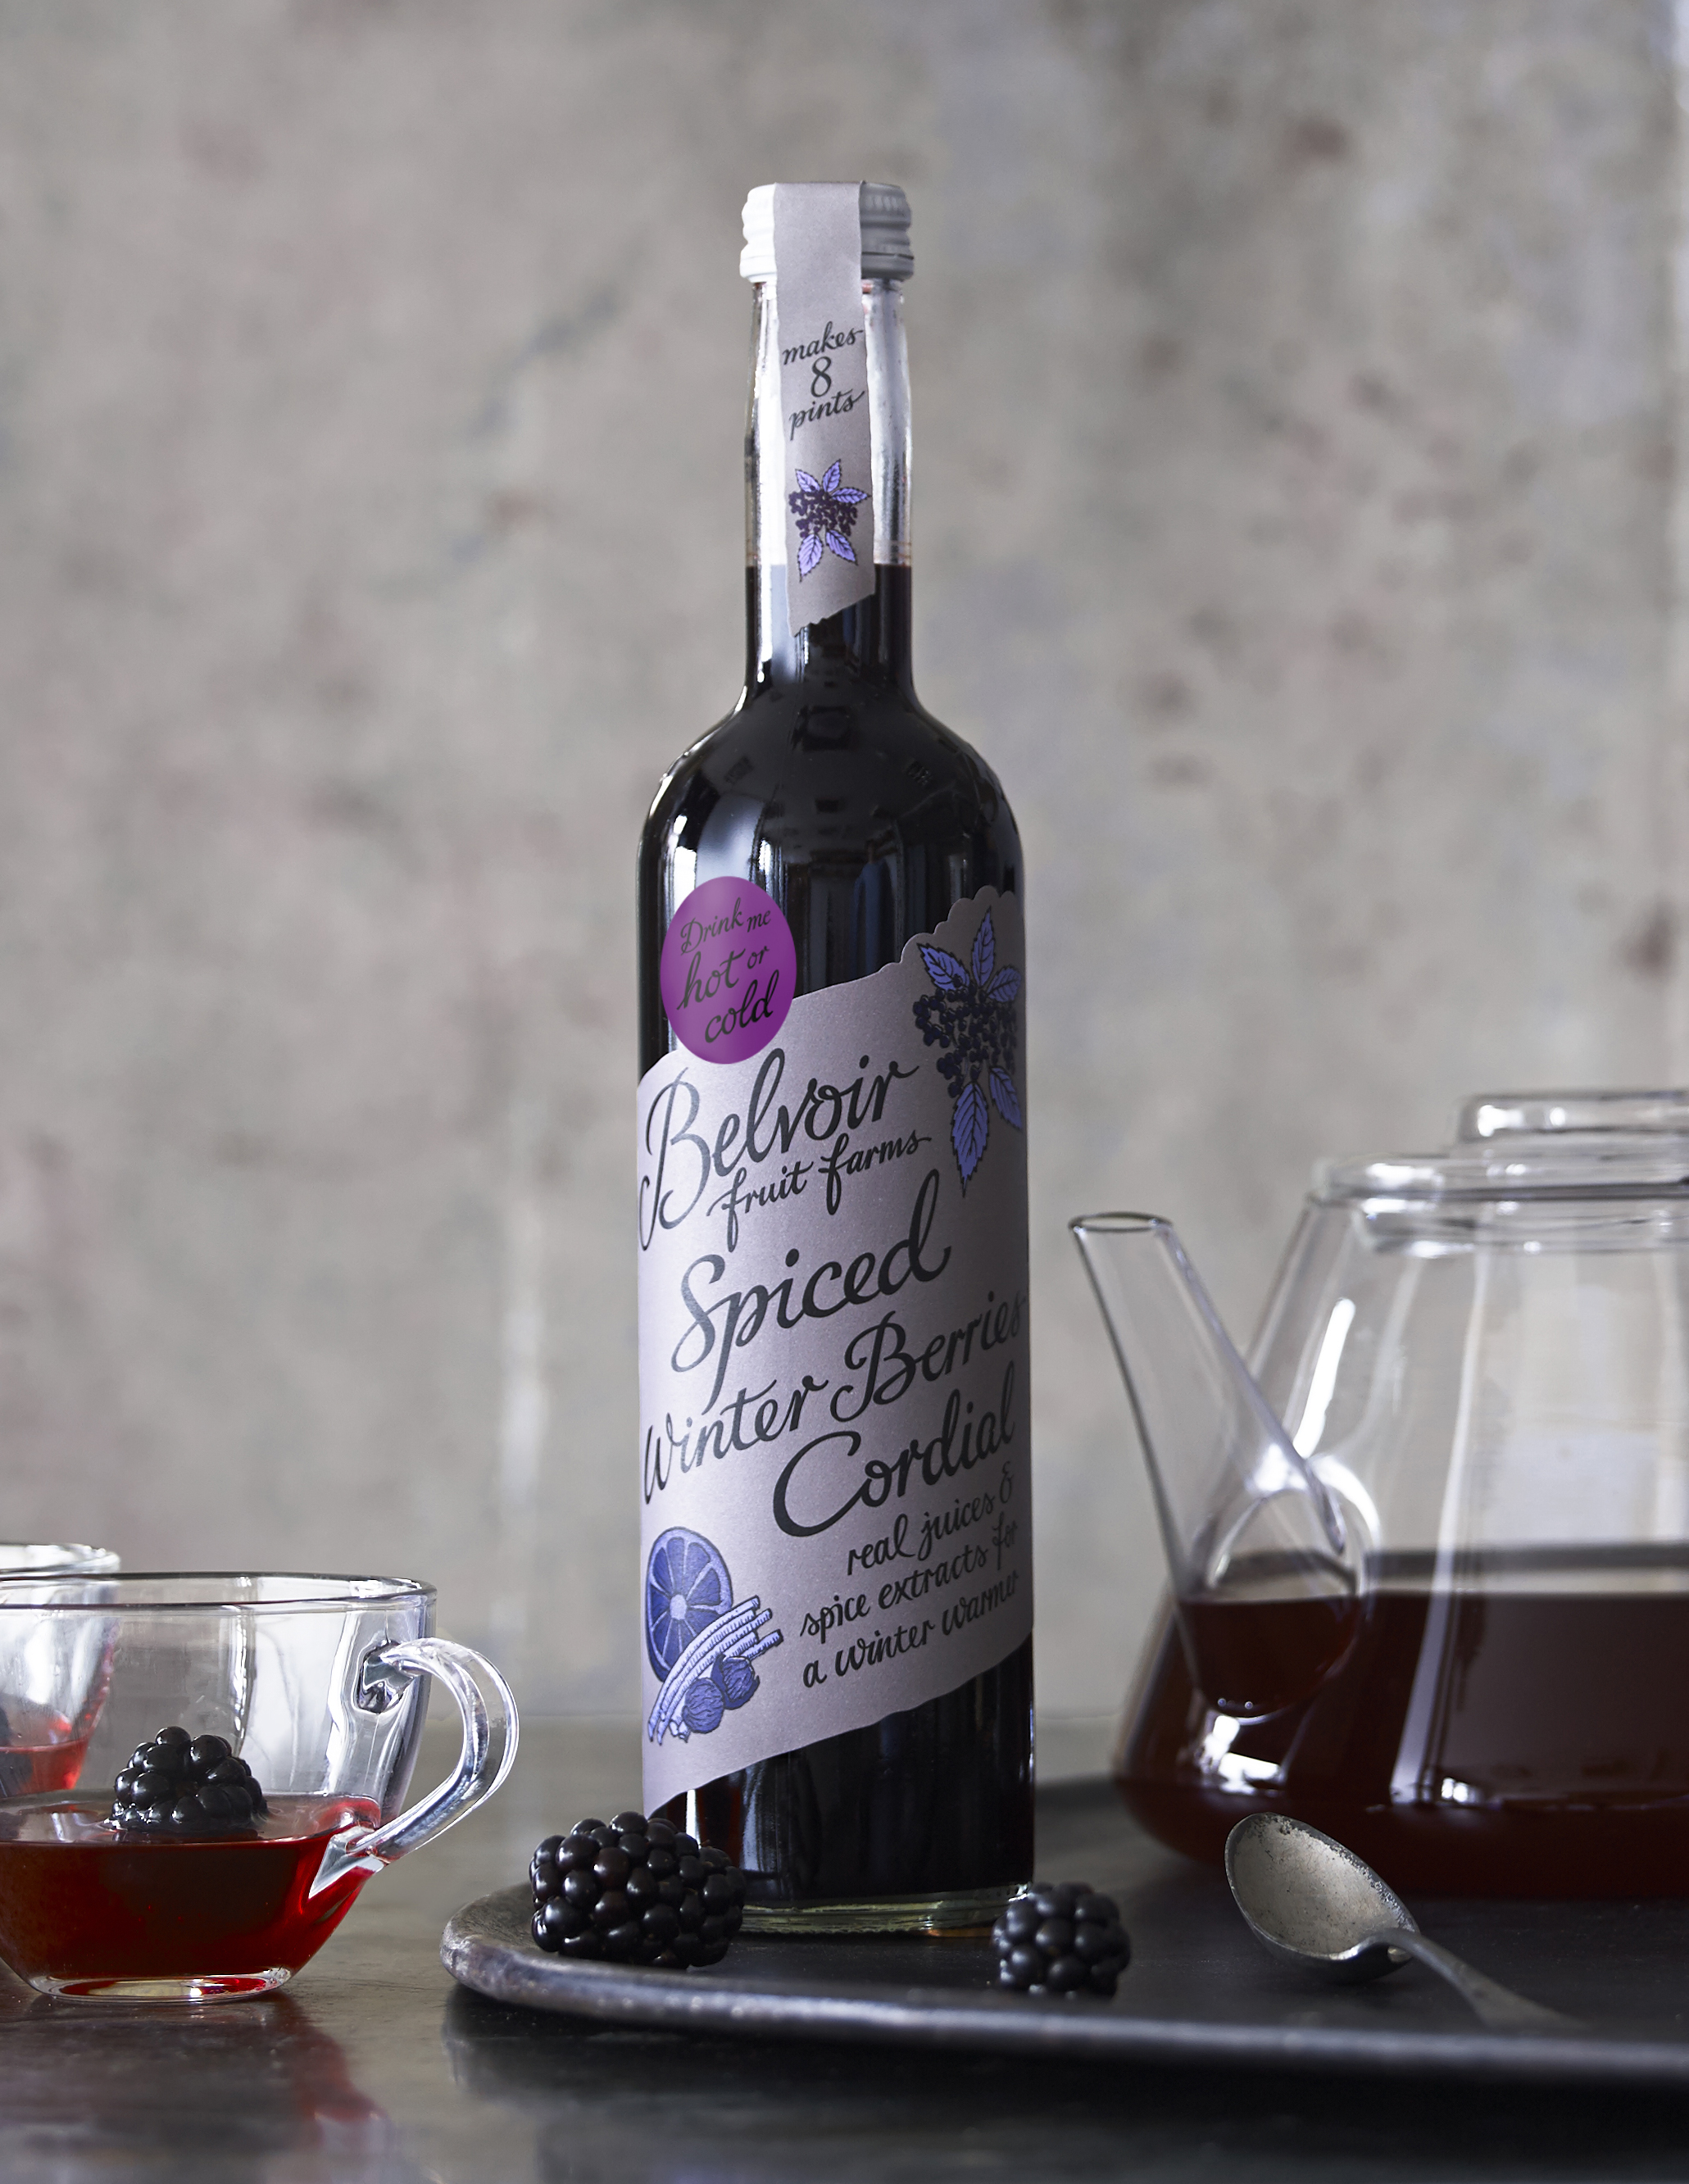 Spiced Winter Berries Cordial by Belvoir - NON-ALCOHOLIC WINTER WARMER DRINKS